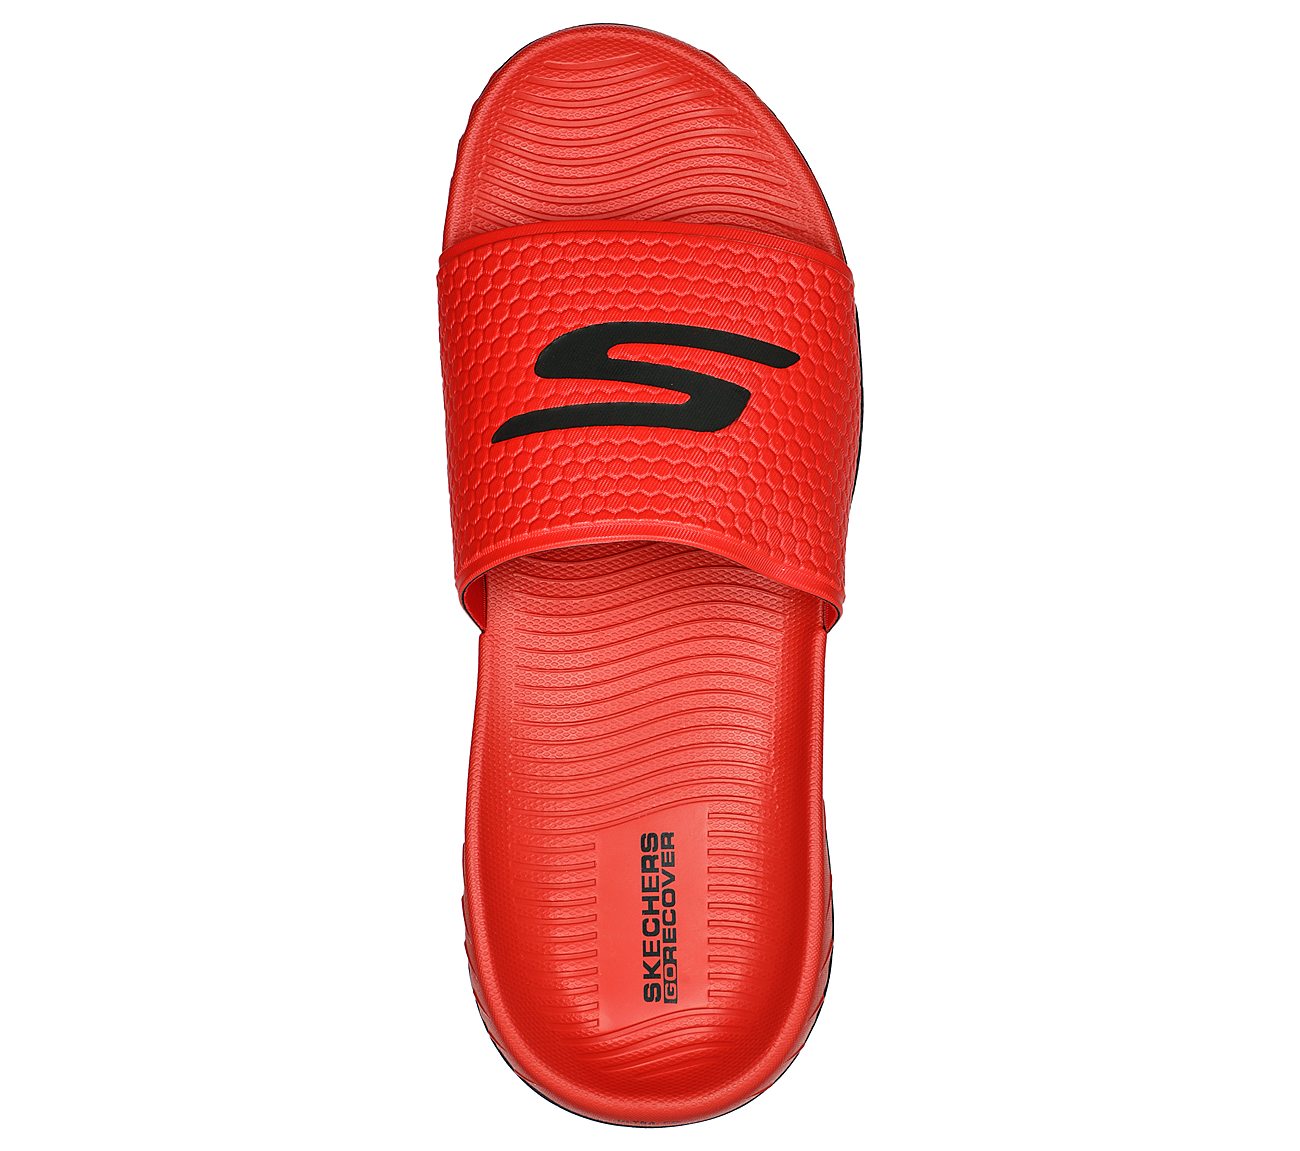 GO RECOVER SANDAL, RED/BLACK Footwear Top View